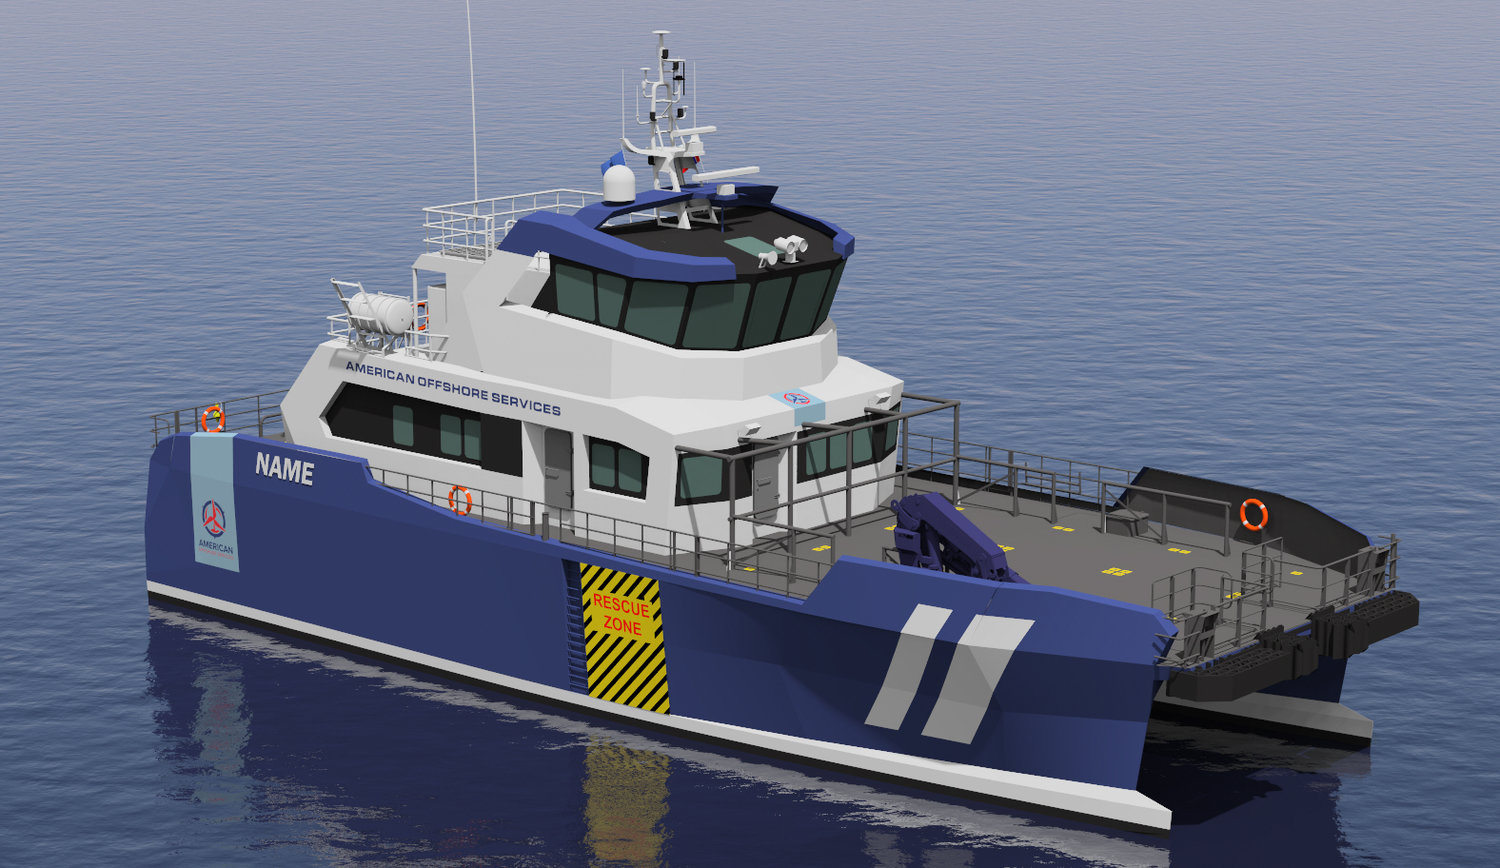 A rendering from NOF shows what the crew transfer vehicles (CTVs) may look like once constructed by Blount.